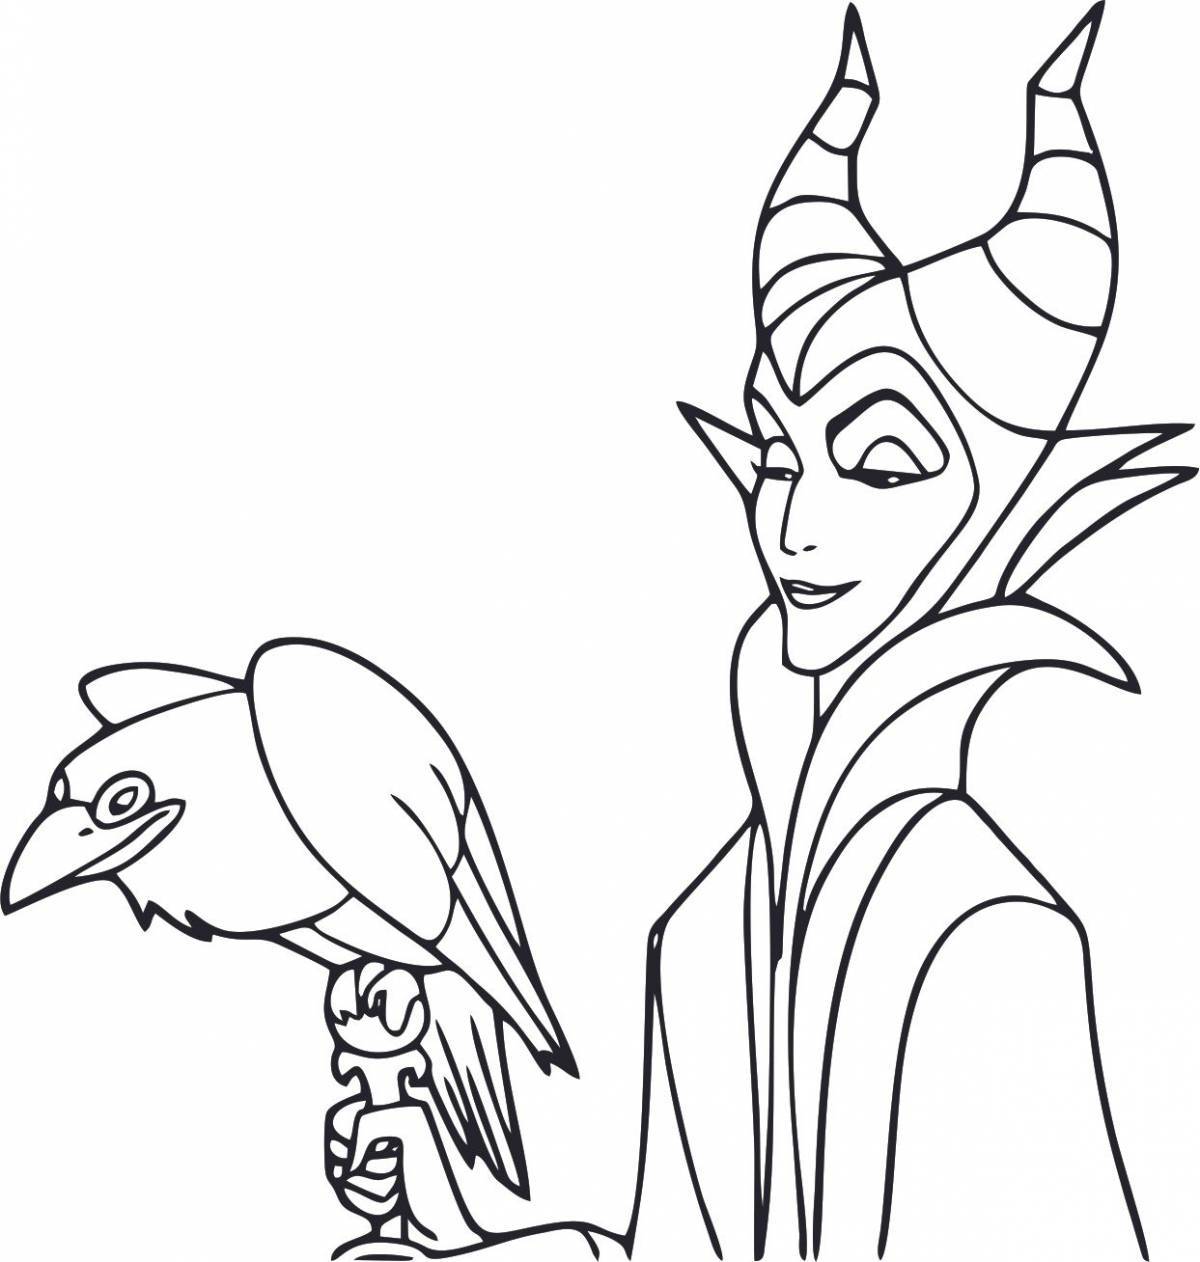 Maleficent live coloring